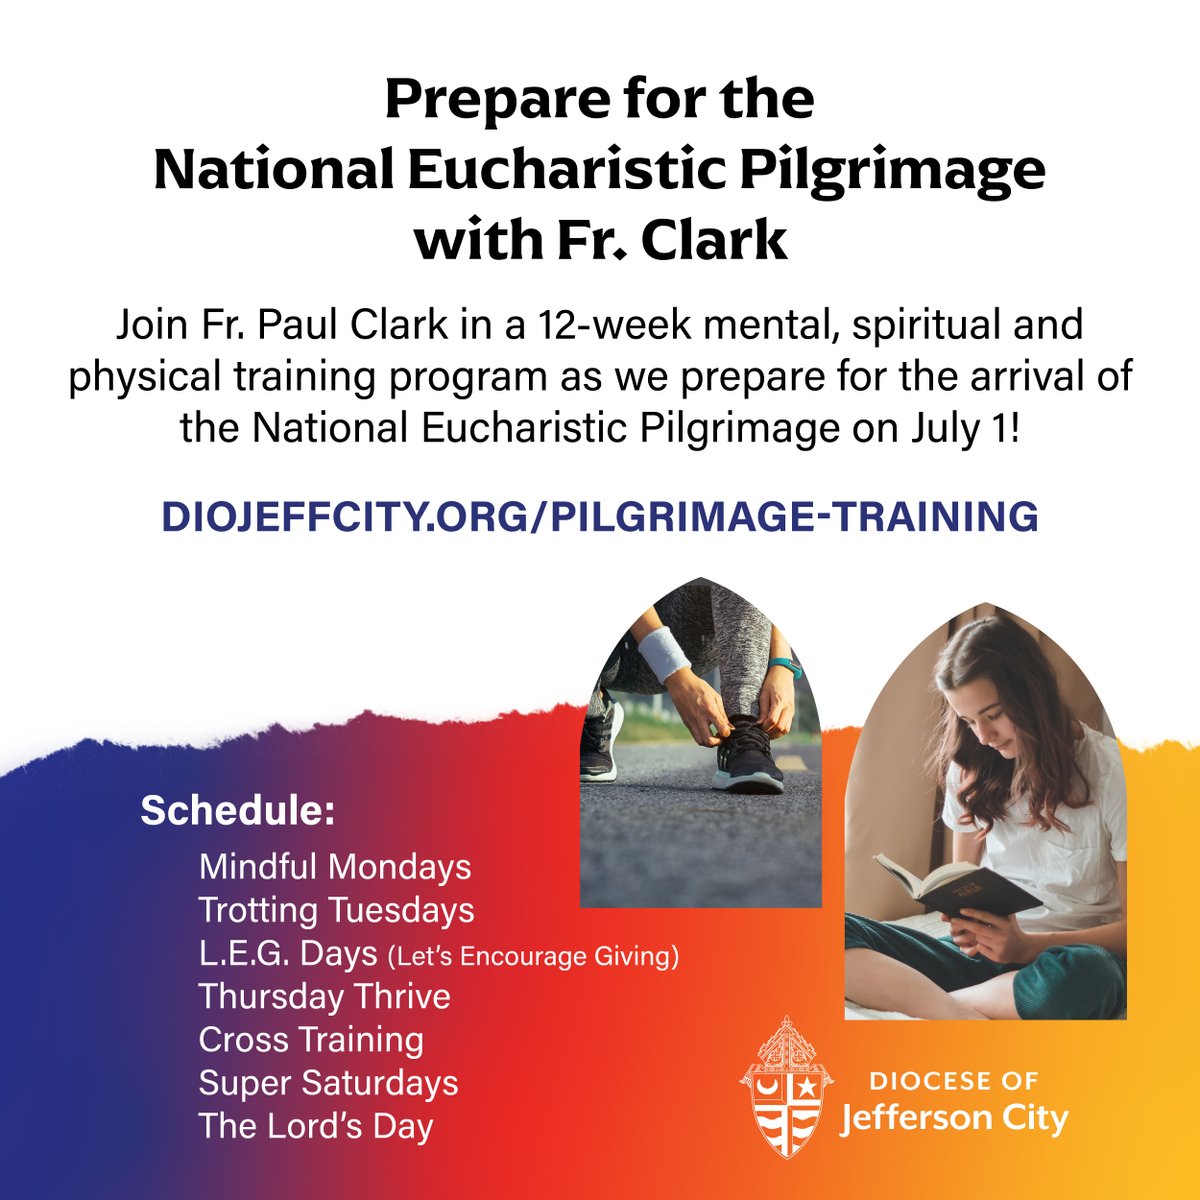 Starting tomorrow, join Fr. Paul Clark in a 12-week mental, spiritual, and physical training program as we prepare for the arrival of the National Eucharistic Pilgrimage on July 1! Download the full training schedule at diojeffcity.org/pilgrimage-tra…